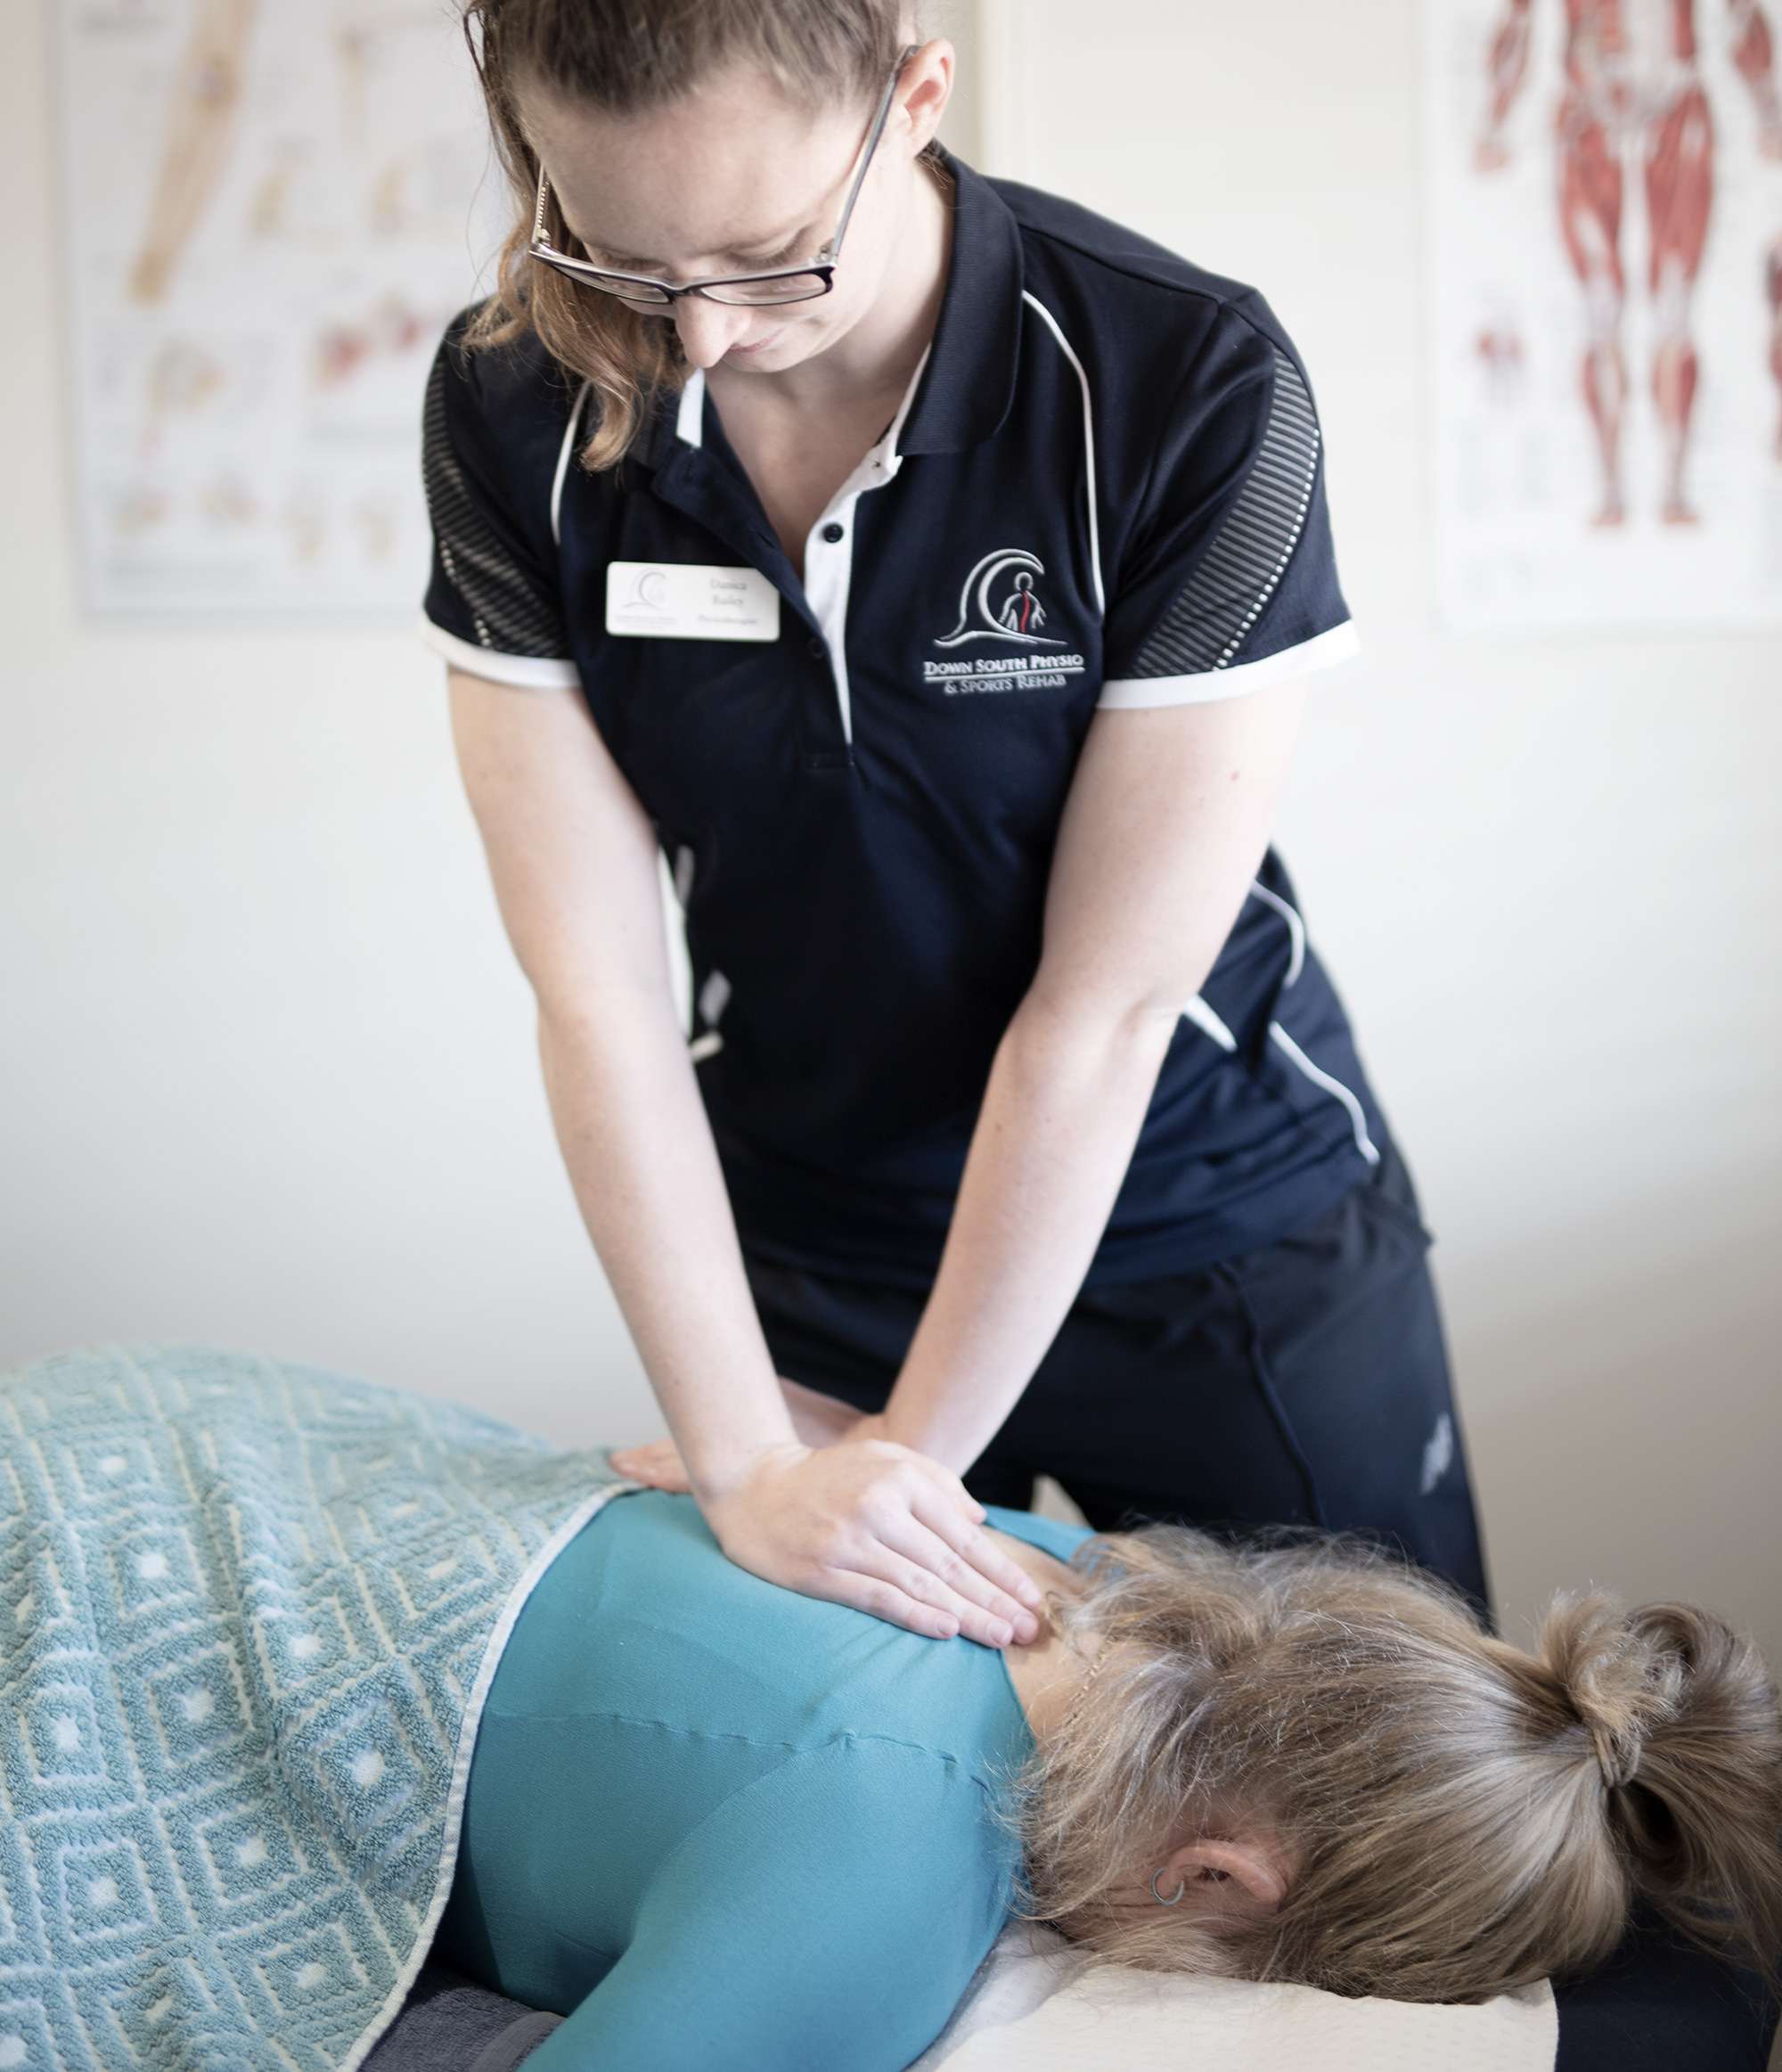 Down South Physio - Manual Therapy - Manual therapy is a major focus of our practice philosophy and treatment approach. This means ‘hands on’ treatment methods including soft tissue work, muscle release techniques, joint mobilisations, spinal manipulation, dry needling and movement techniques.